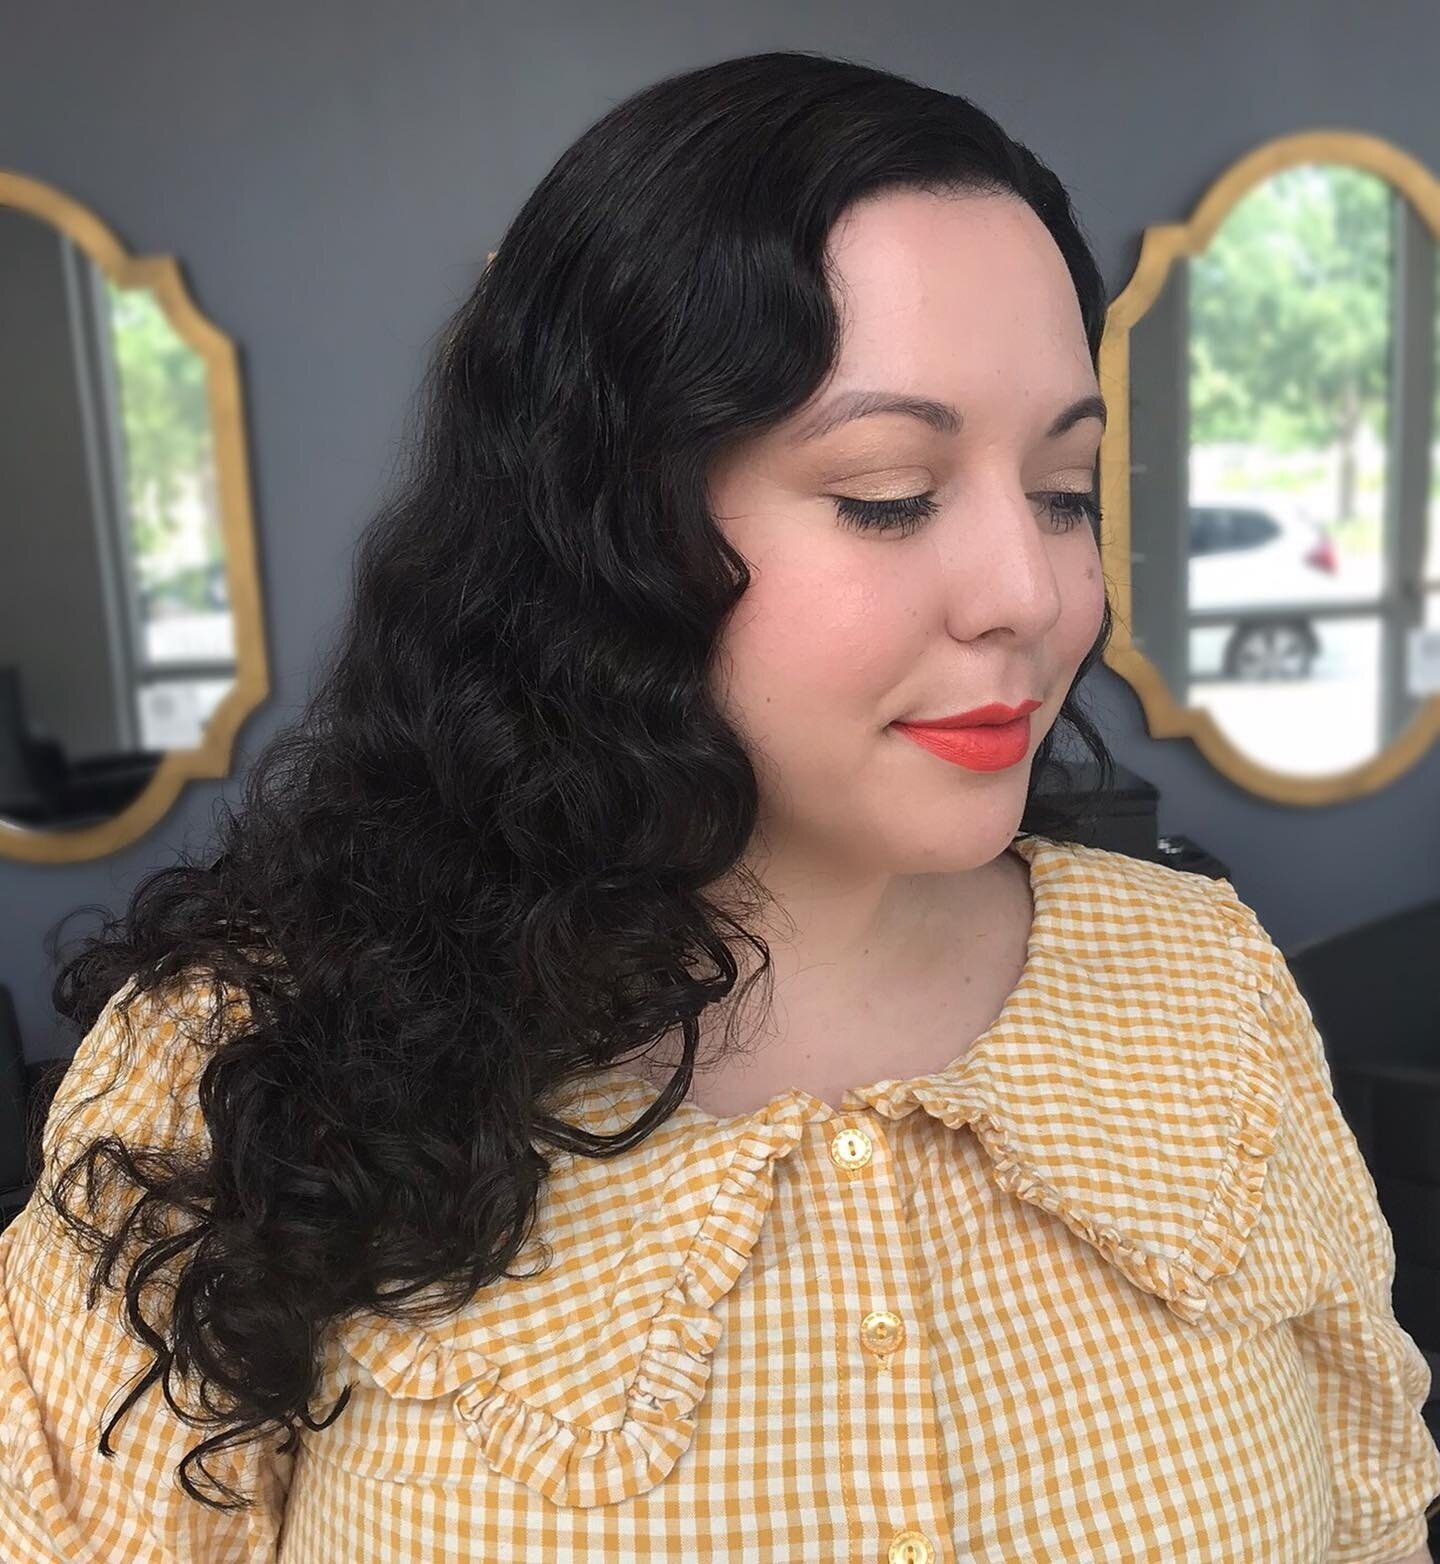 Would you believe that these beautiful curls are NATURAL! 😍 I love the challenge of working with natural curls to recreate the look of a vintage set. ⁠
⁠
To achieve this, I scrunched her hair with some curl cream to bring back that natural curl afte